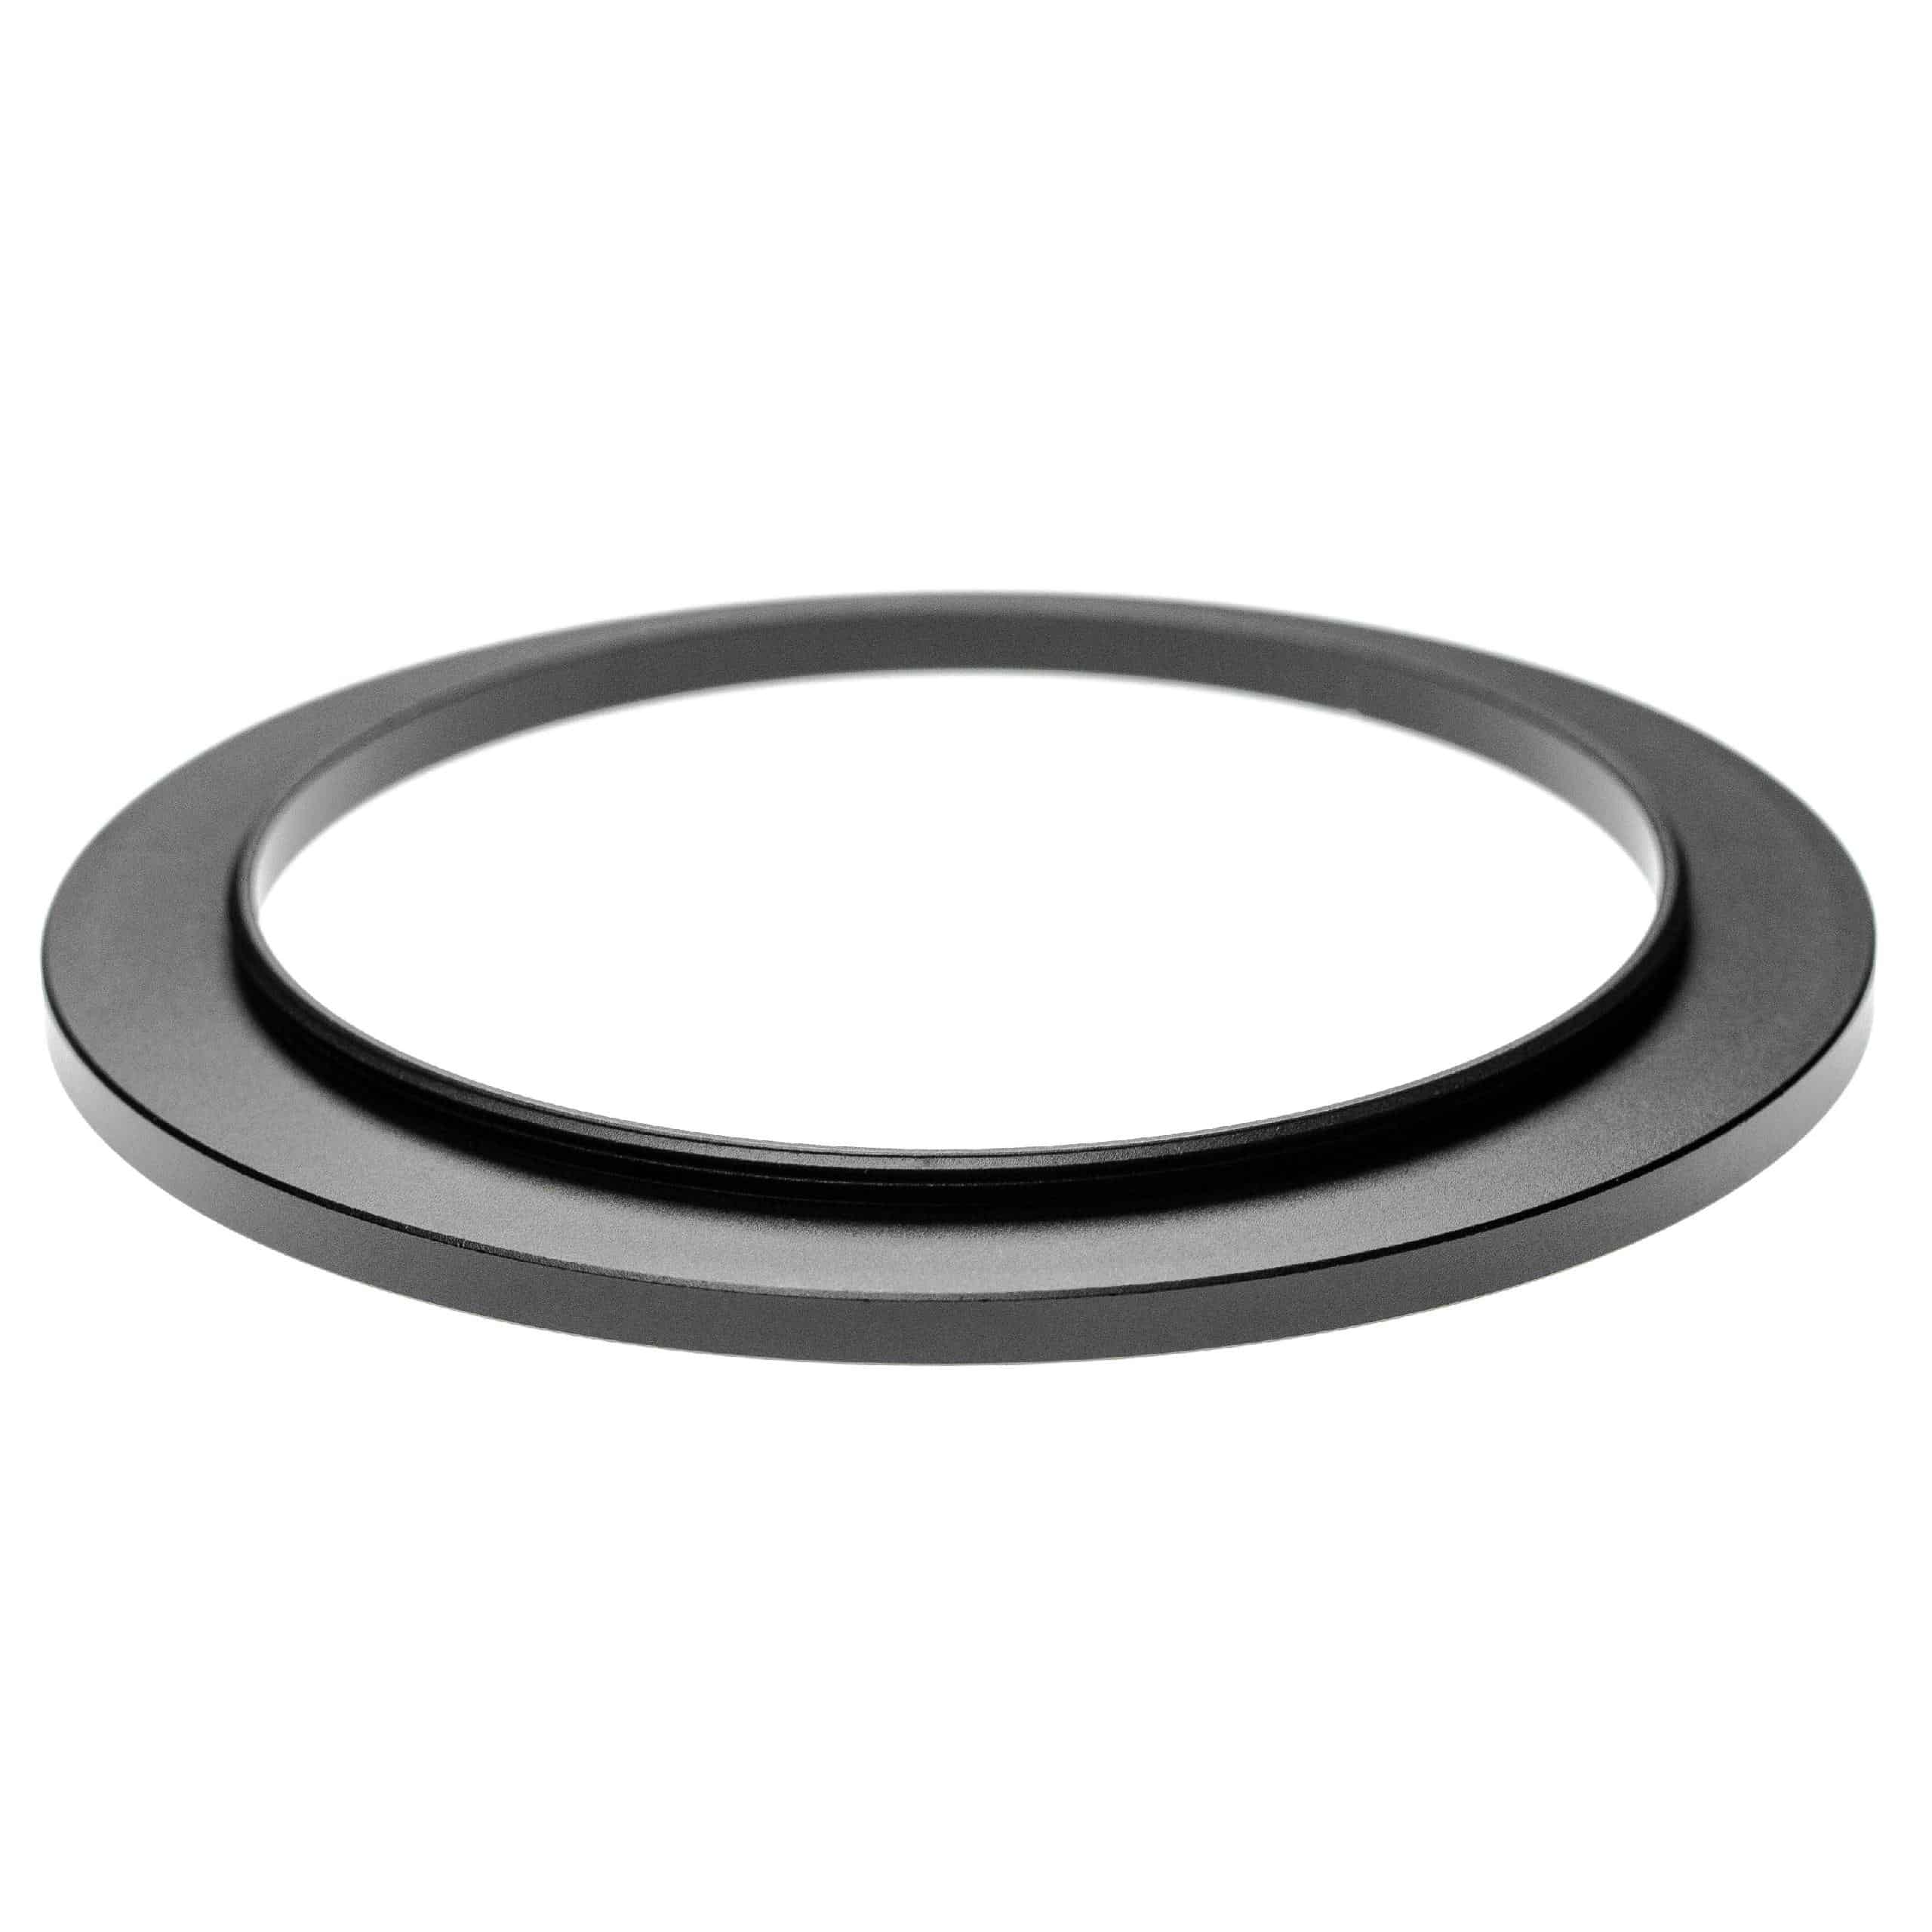 Step-Up Ring Adapter of 86 mm to 105 mmfor various Camera Lens - Filter Adapter